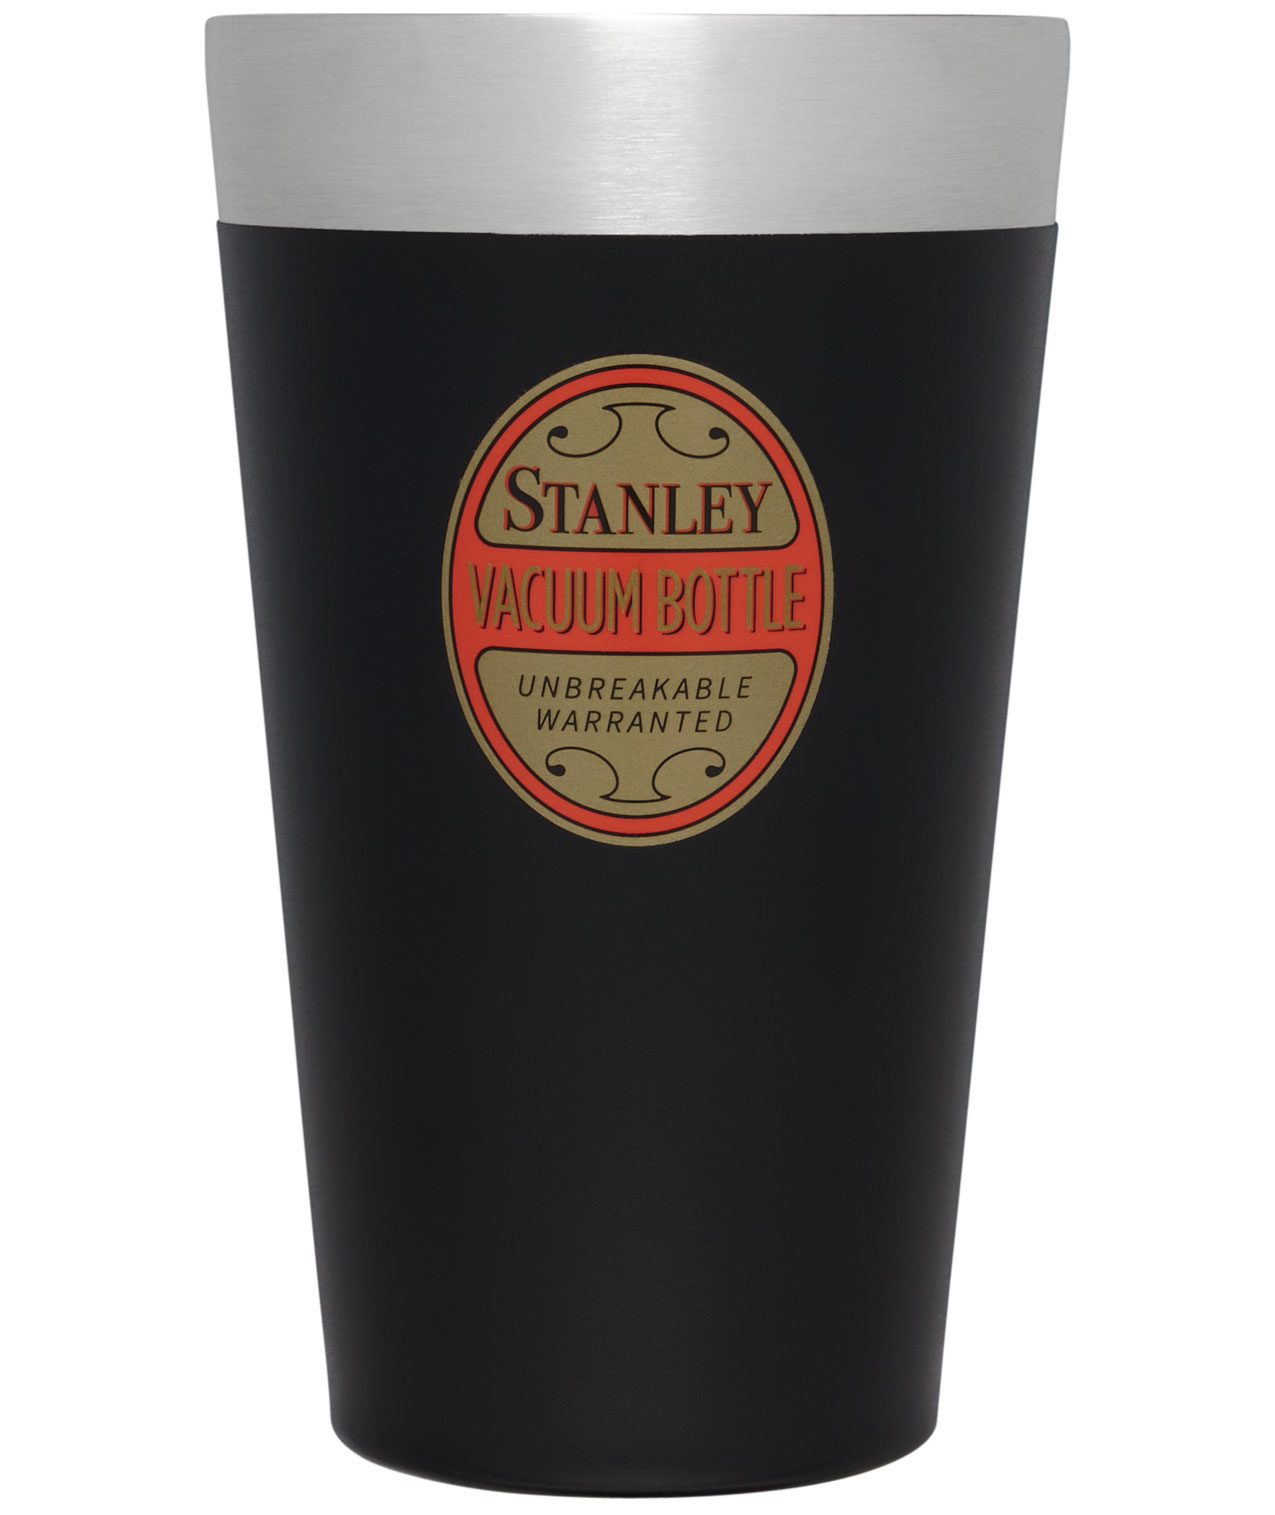 Stanley The Stay-Chill Beer Pint 16oz